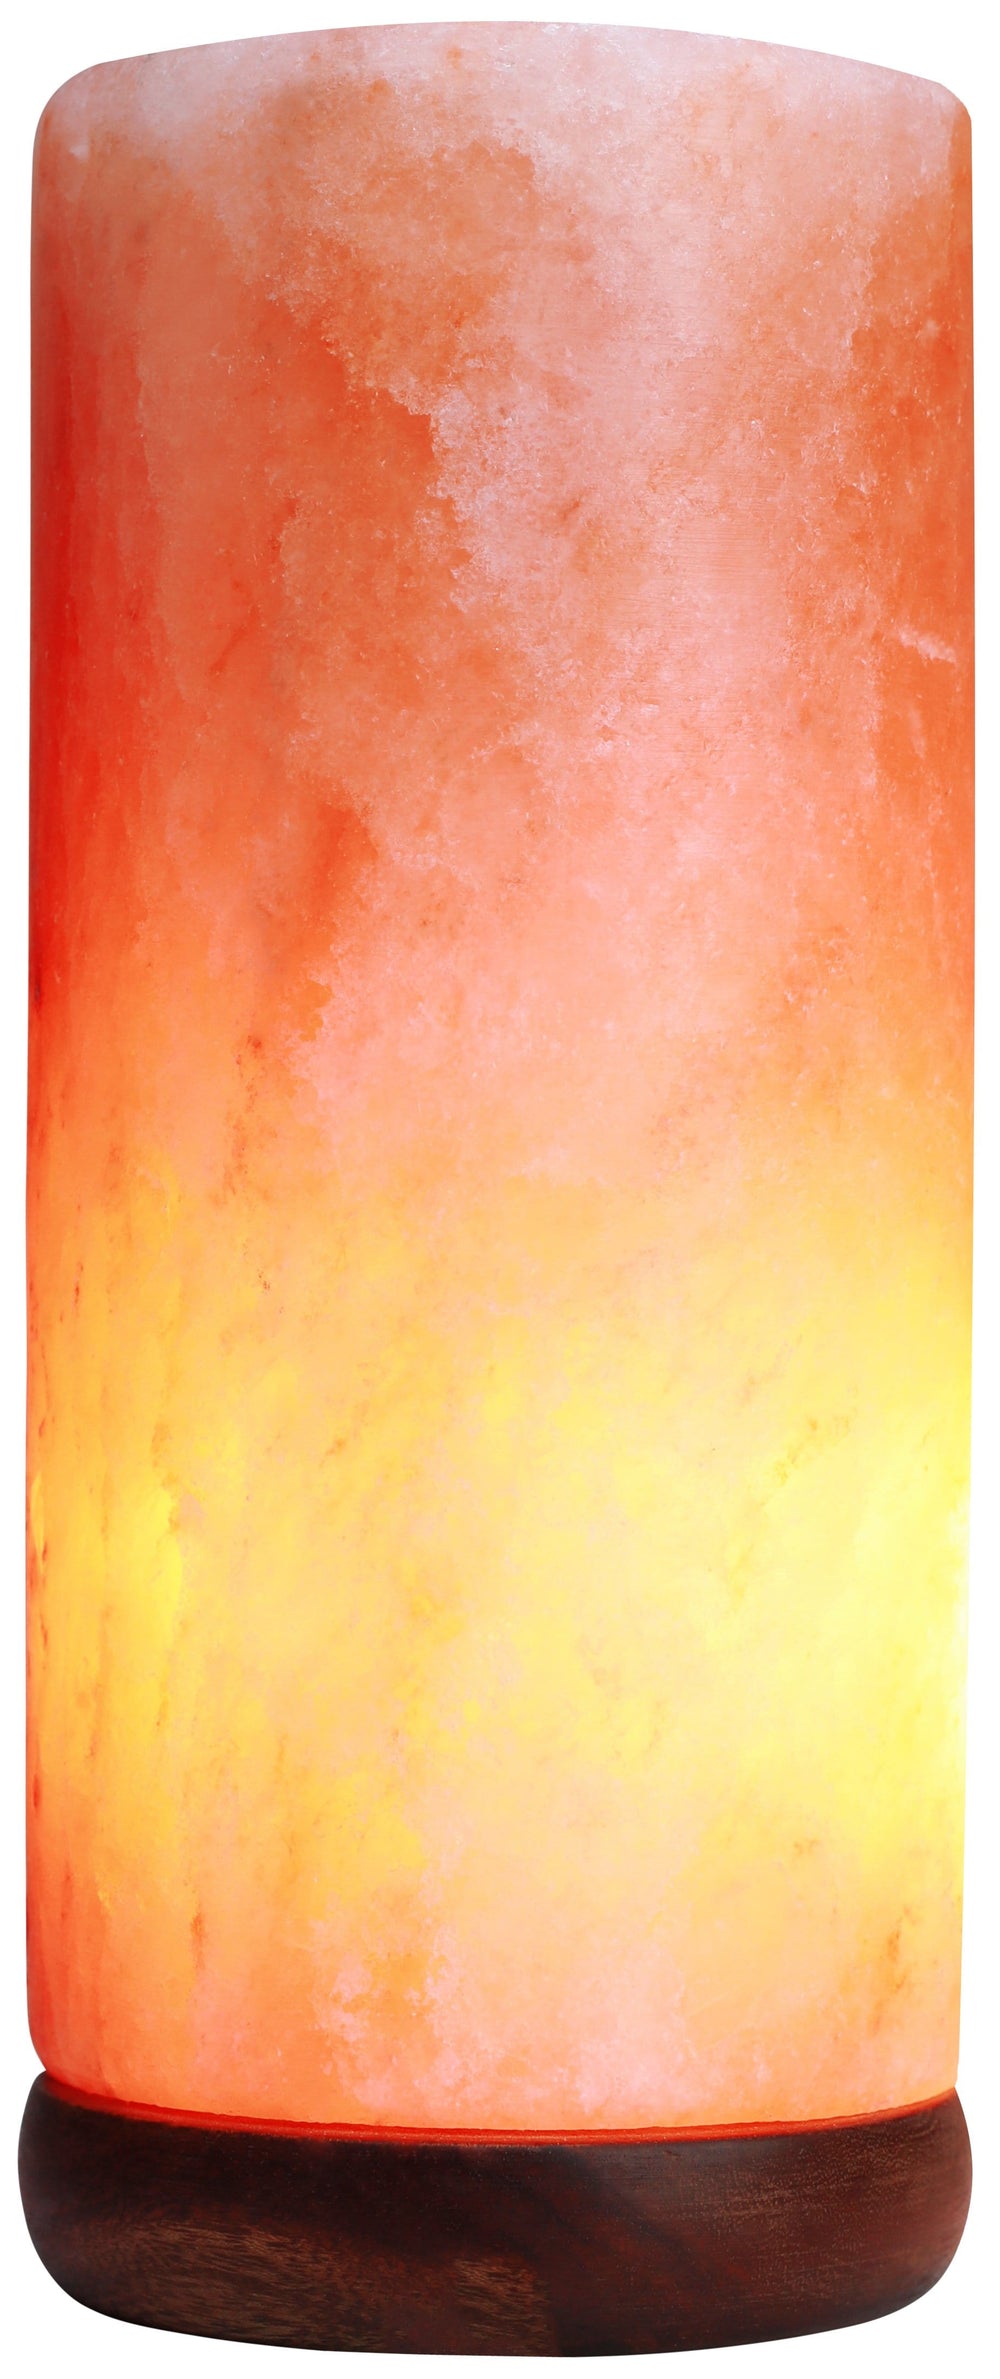 Himalayan Rock Salt Cylinder Lamp, 7 Inches Tall - Soft Calm Therapeutic Light - Smoothly Carved Handcrafted Cylindrical Design - Finished Wood Base - Tibetan Evaporated Rock Lamps - , Dark Orange Hue